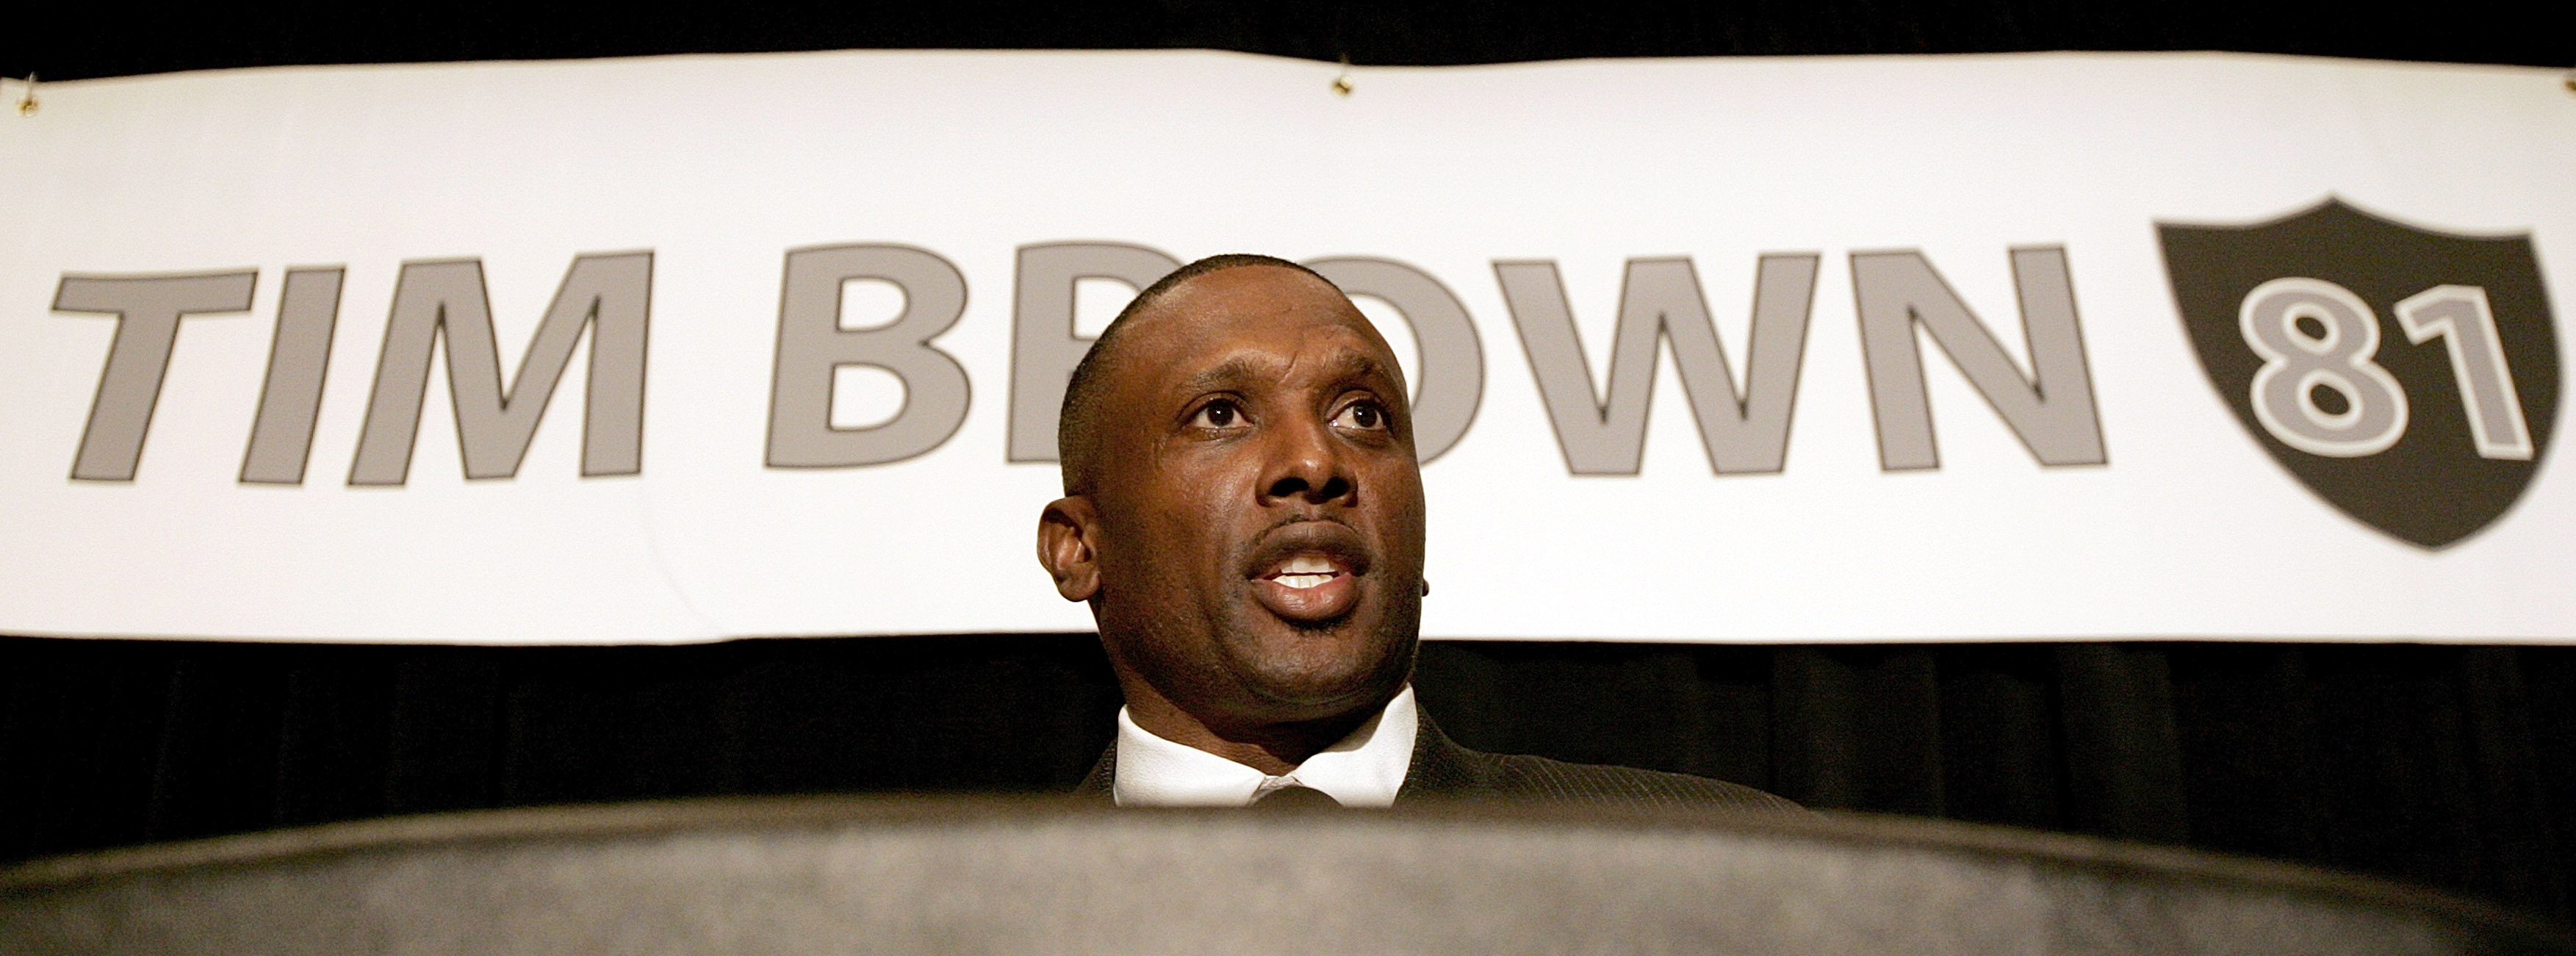 OAKLAND, CA - JULY 18:  Tim Brown announces his retirement from professional football after signing a one day contract with the Oakland Raiders, whom he played most of his career with, during a press conference at the Grand Ballroom of the Oakland Airport